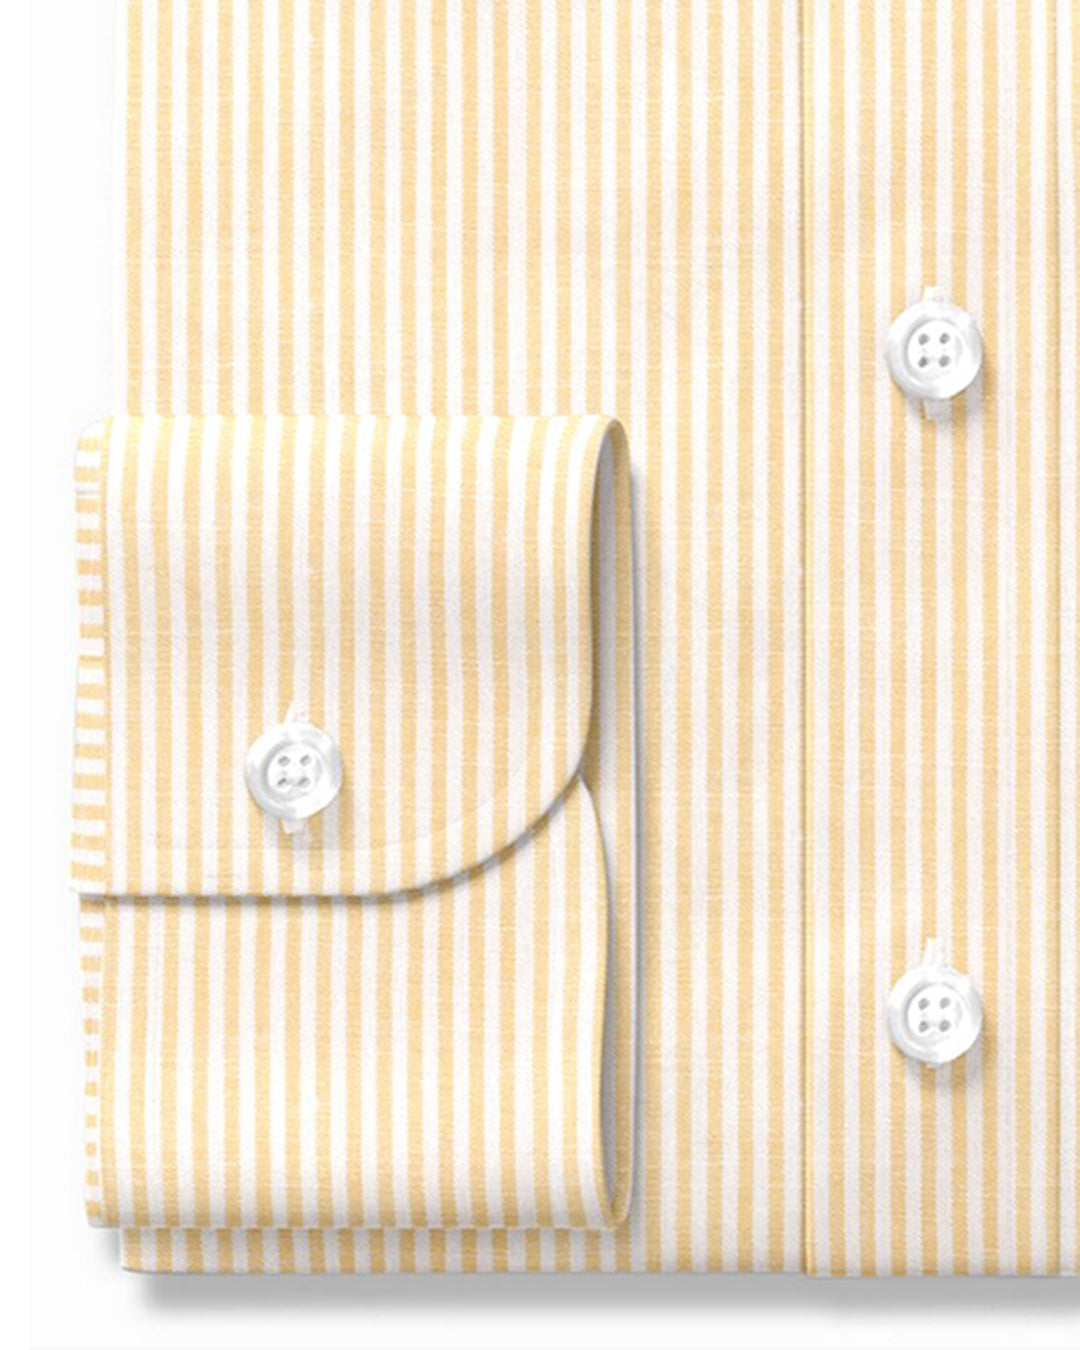 Cuff of the custom linen shirt for men in yellow candystripes by Luxire Clothing